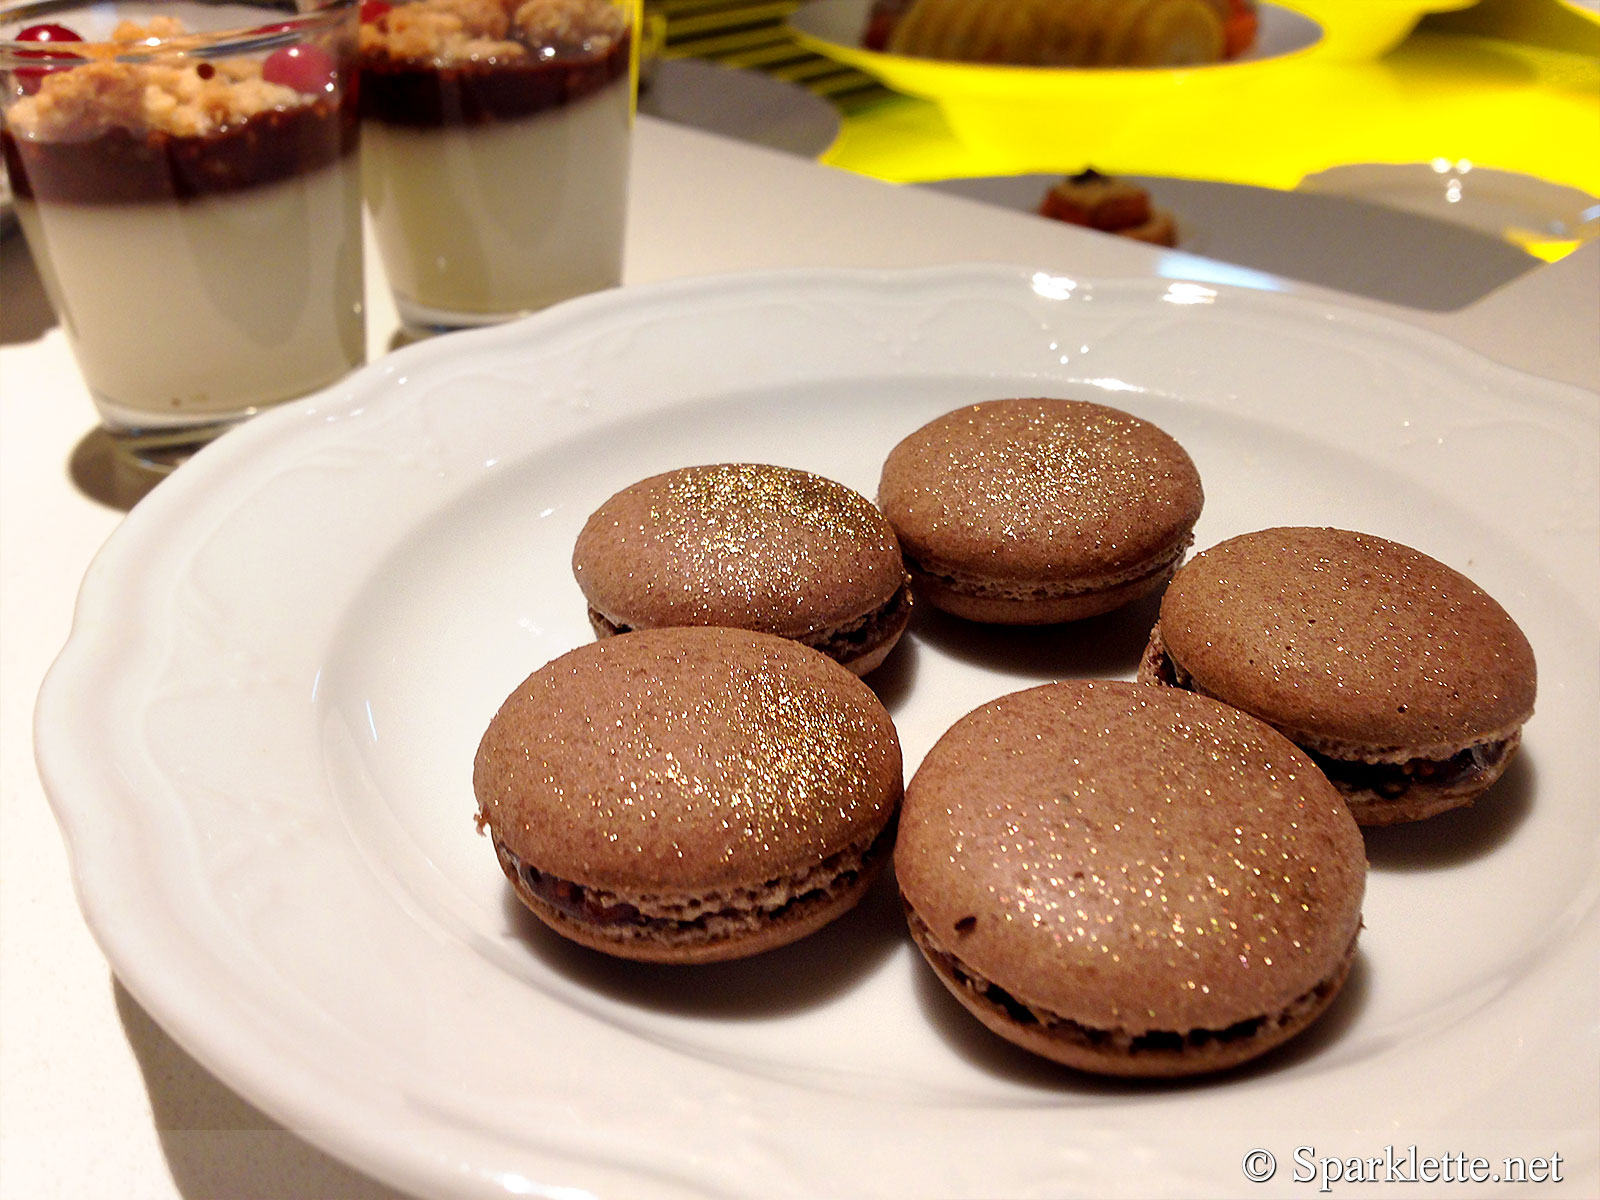 Gold dusted macarons